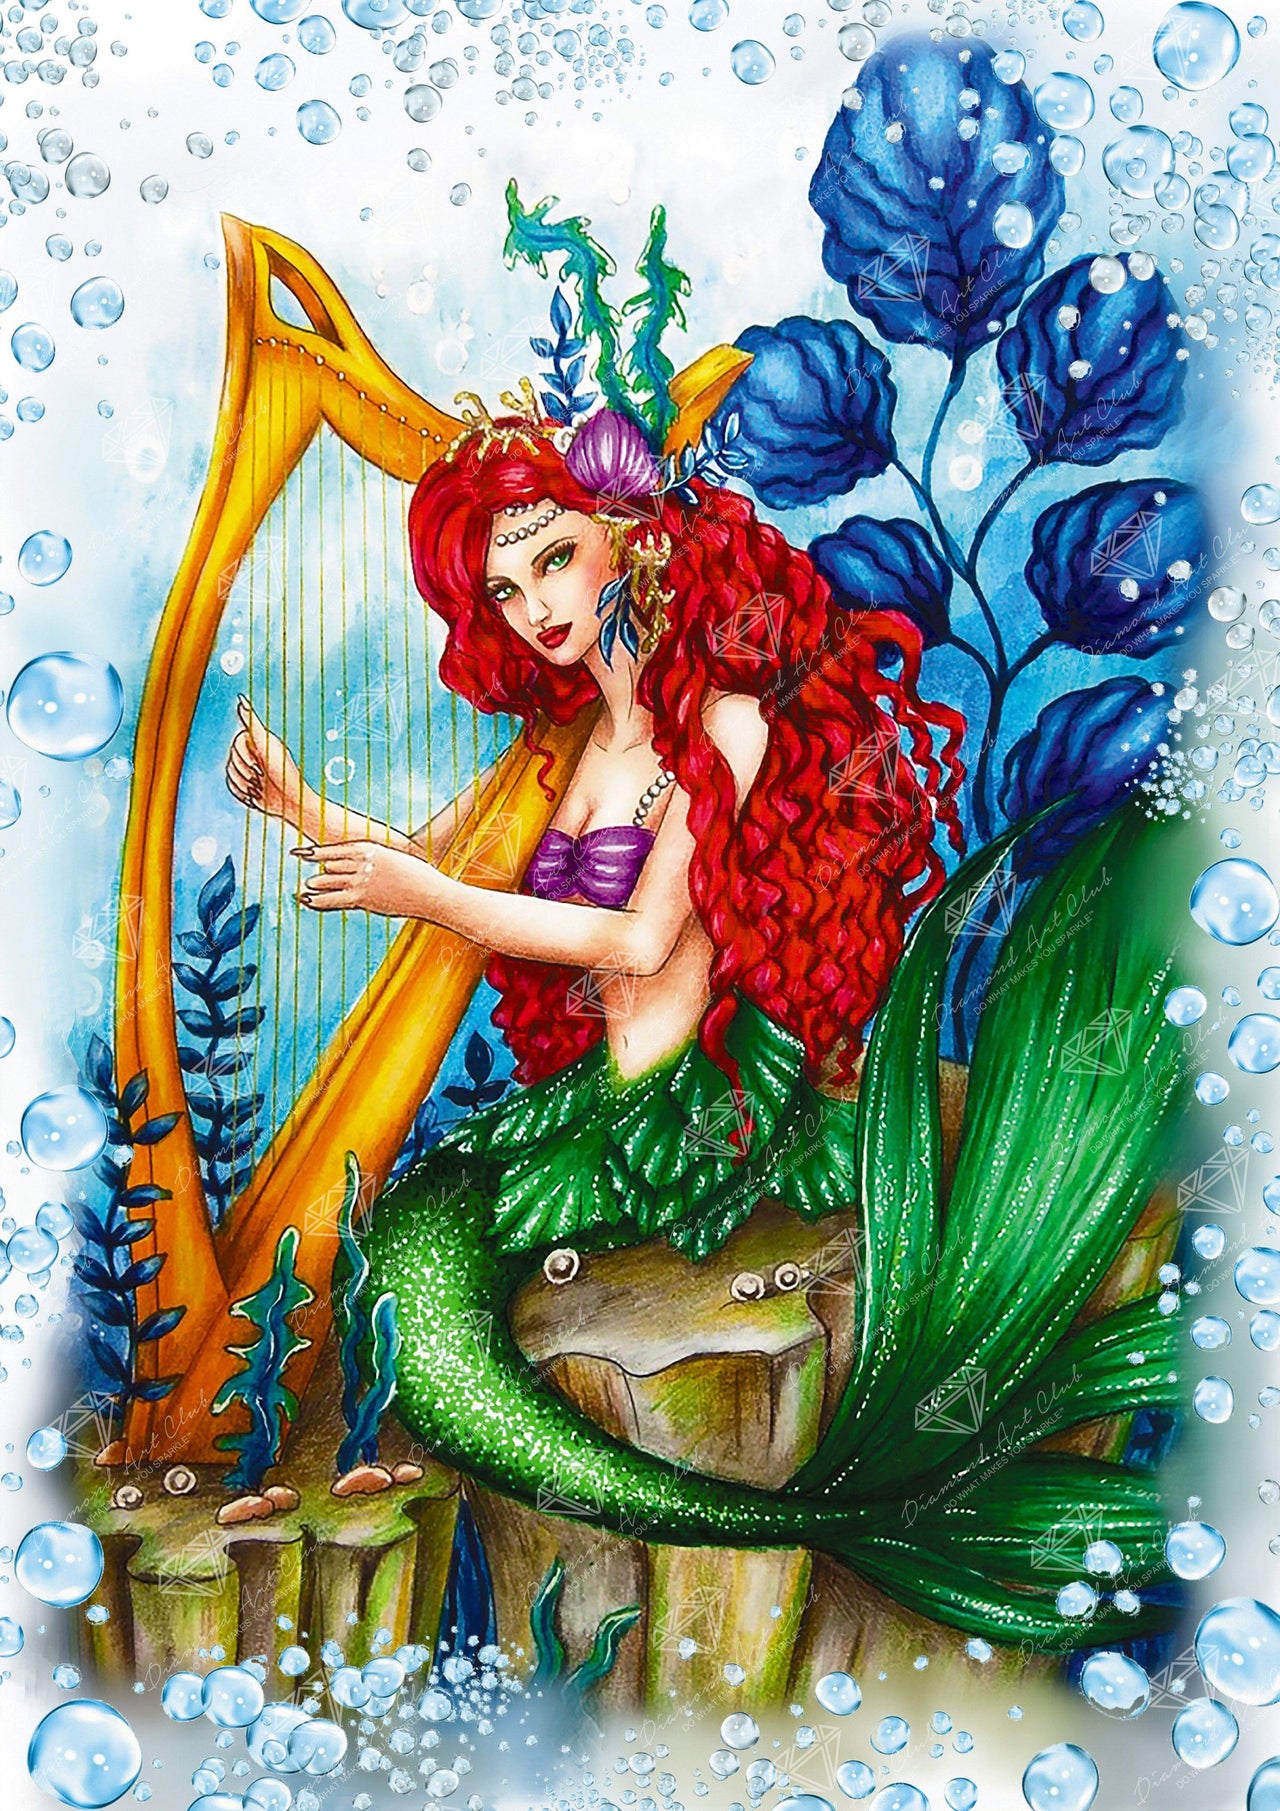 Diamond Painting Mermaid Legends 27.6" x 39.0″ (70cm x 99cm) / Square With 58 Colors Including 2 ABs / 108,582